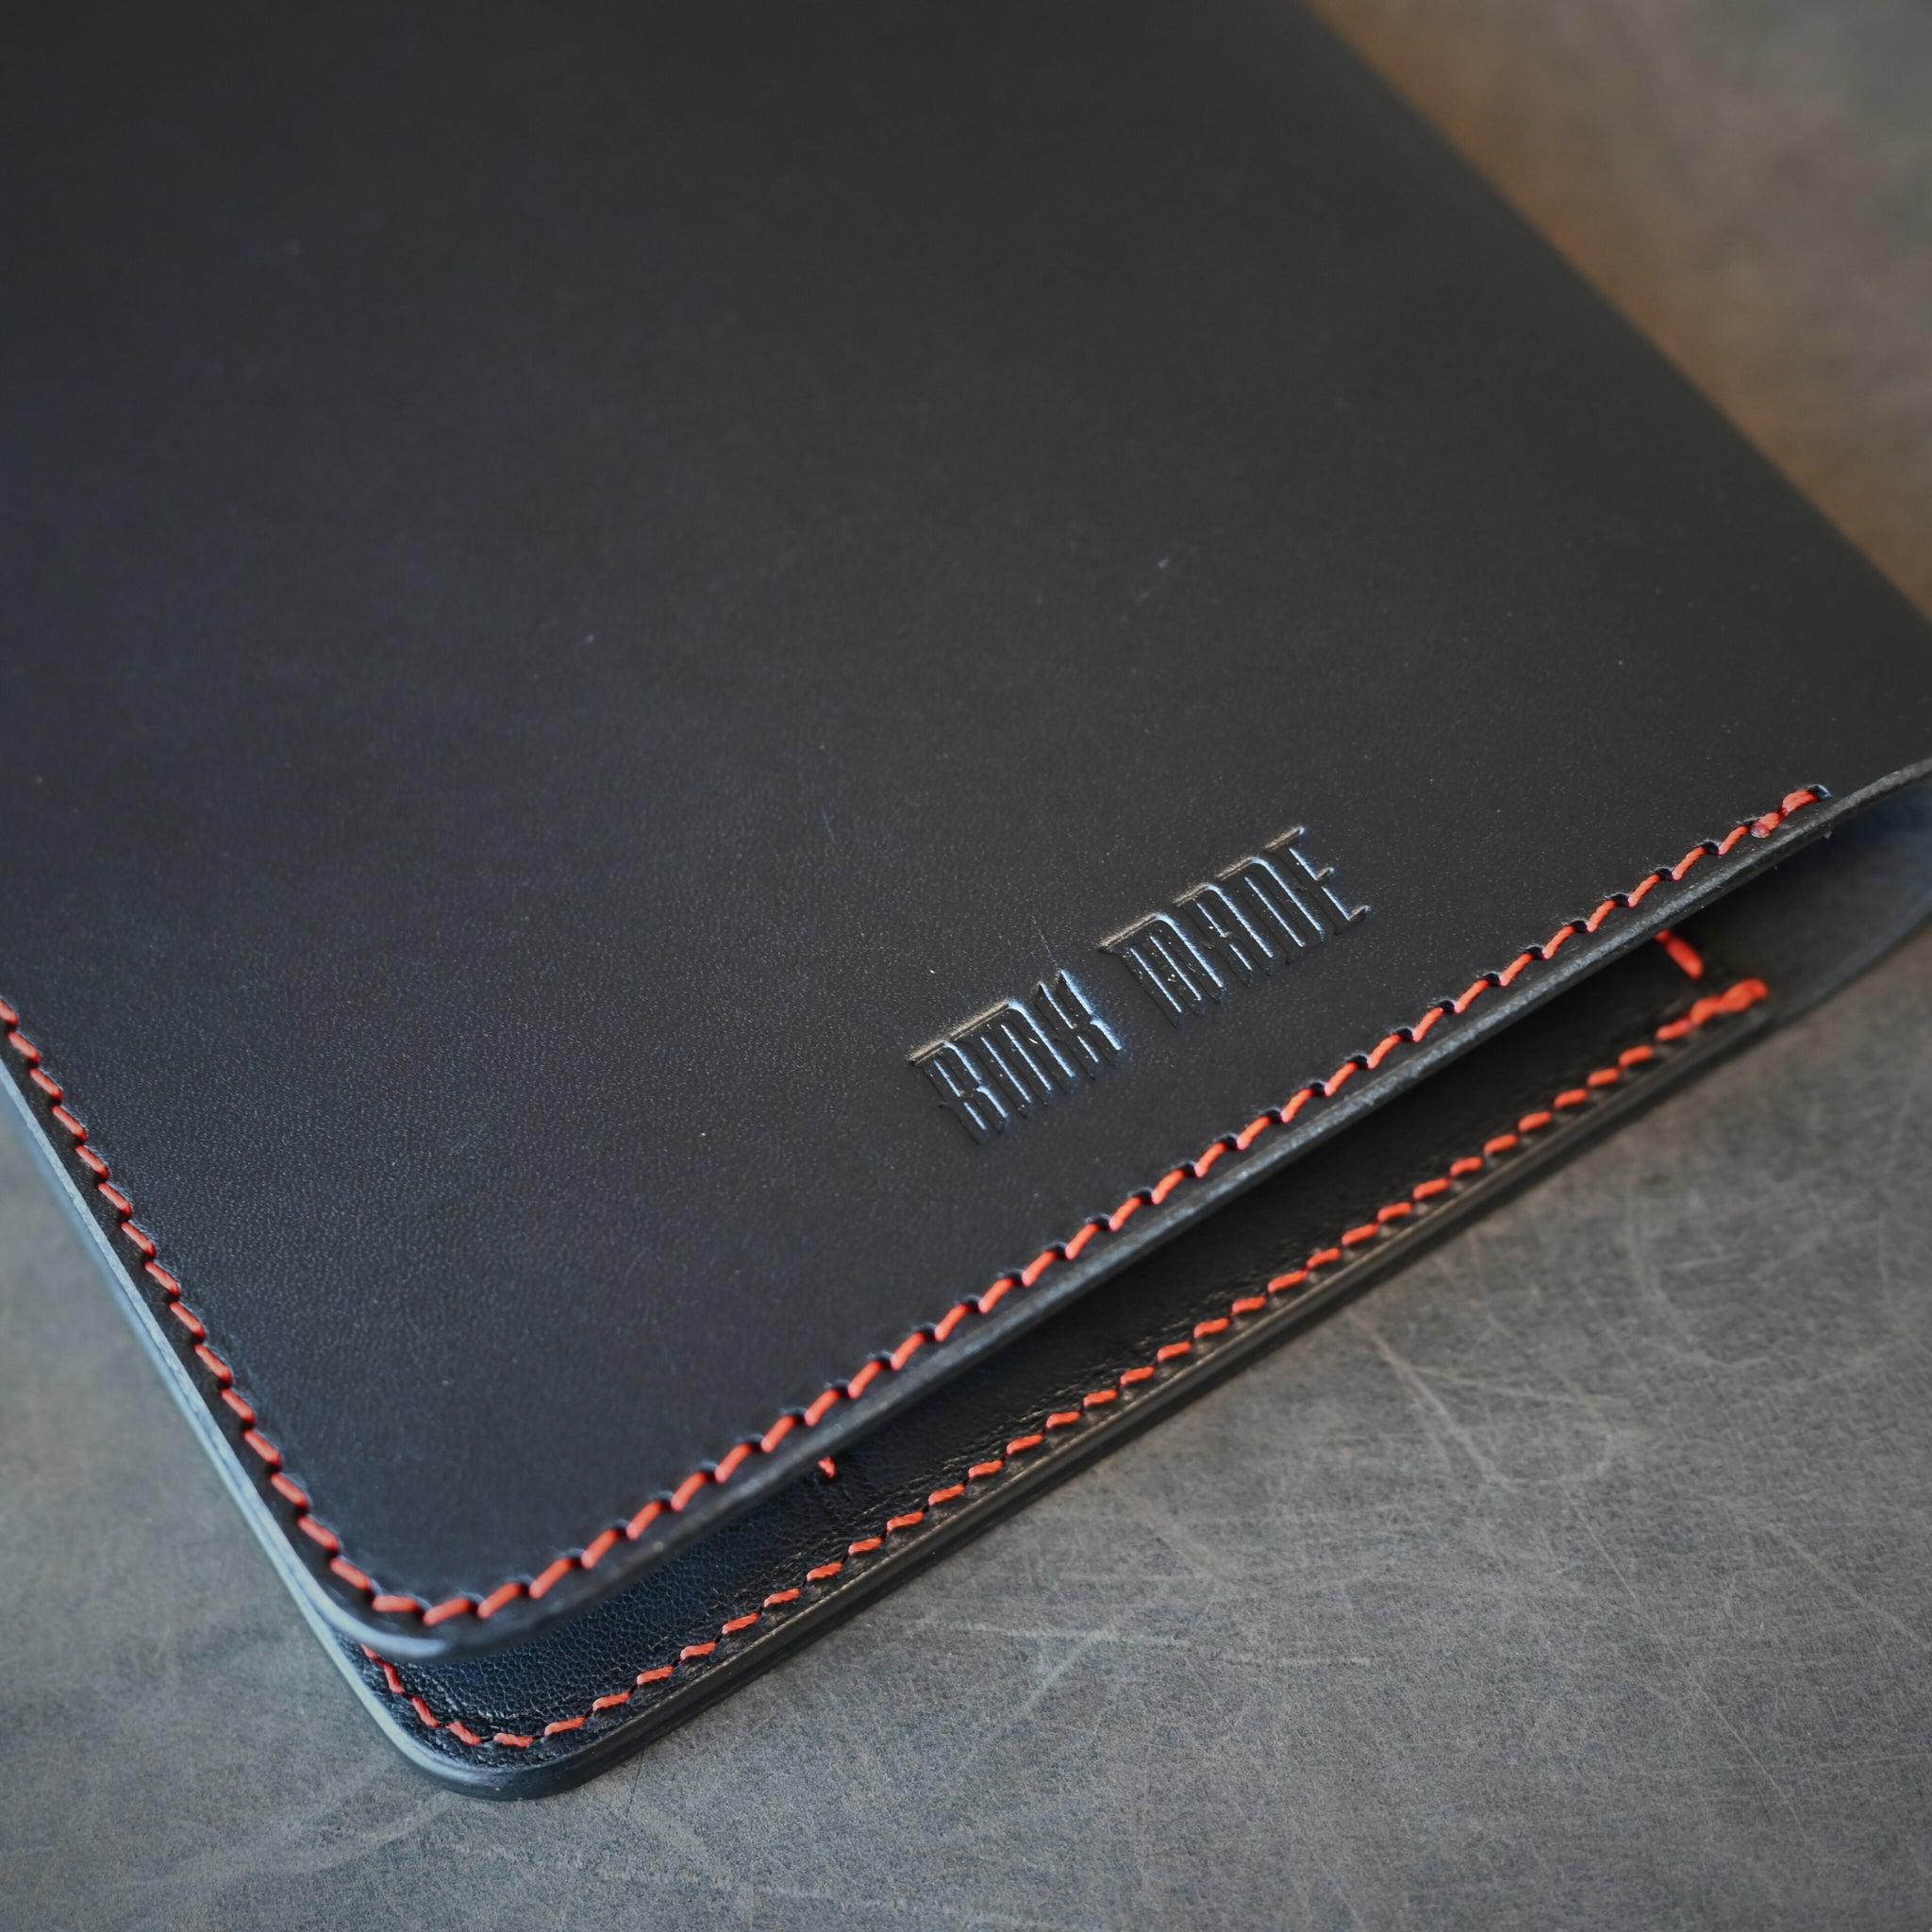 Ready To Ship A5 Leather Notebook Cover Black W/ Orange Thread